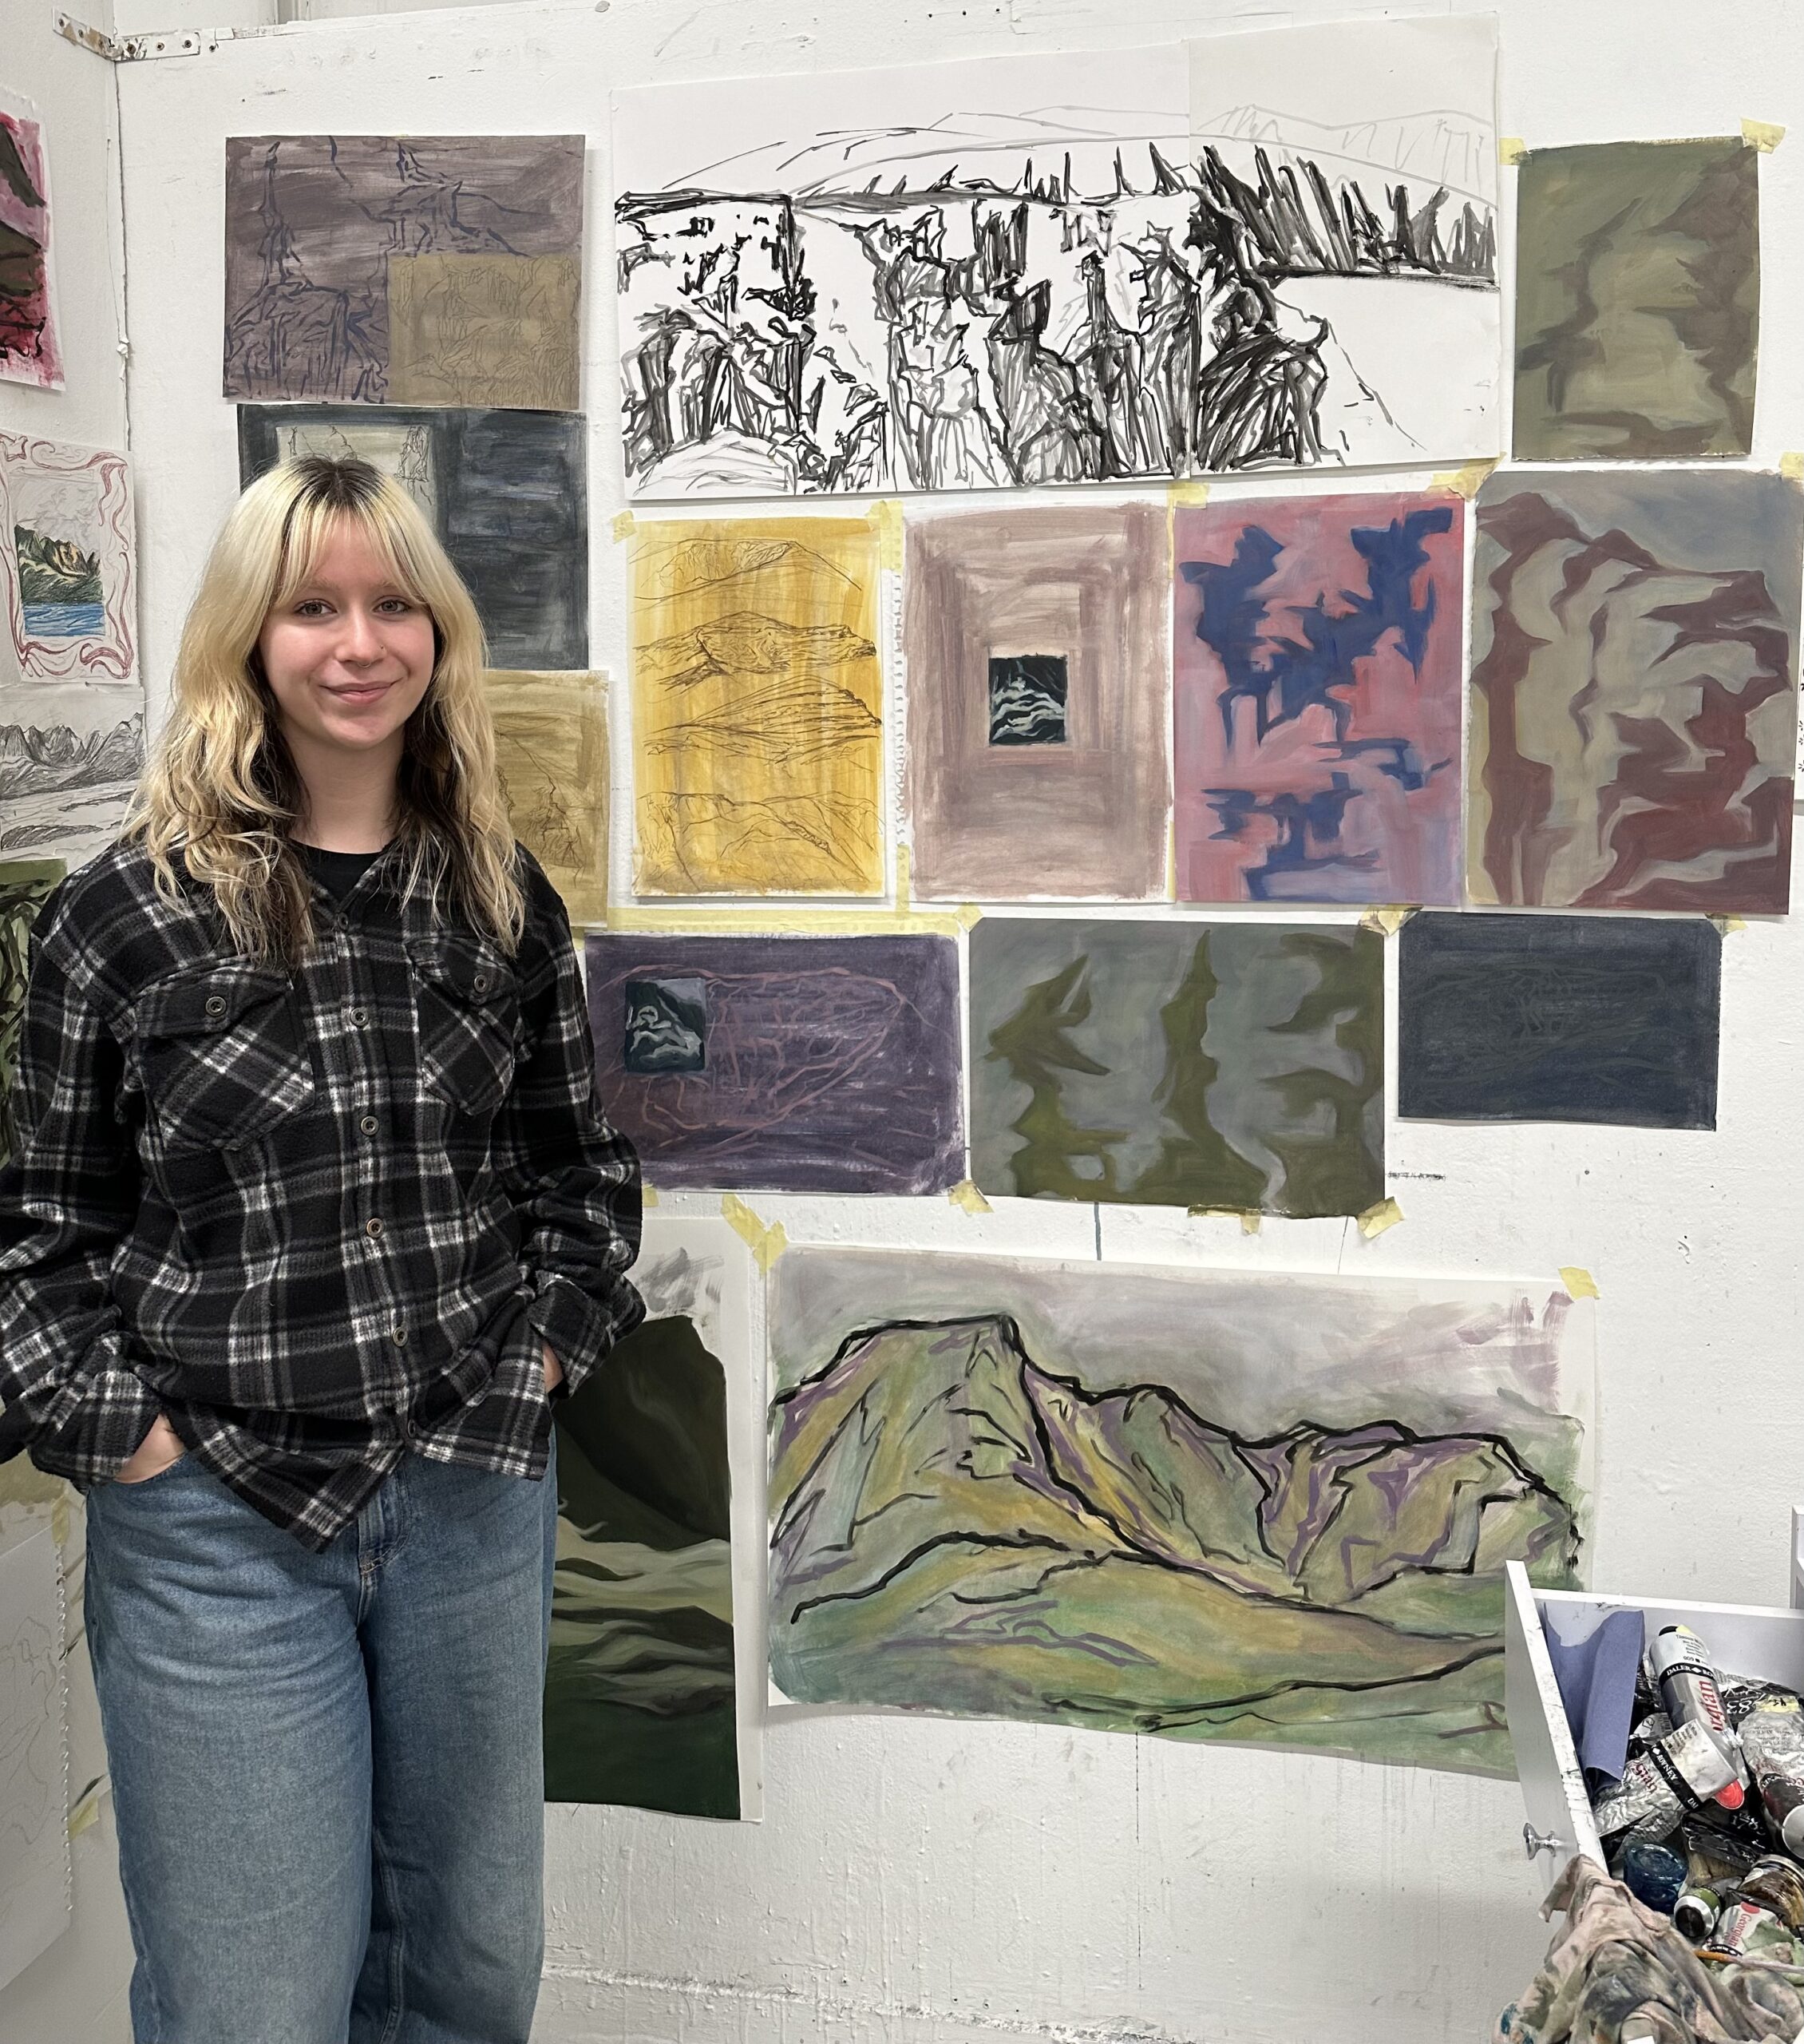 THE SIX FOOT GALLERY INTERVIEW: Kayla Spence